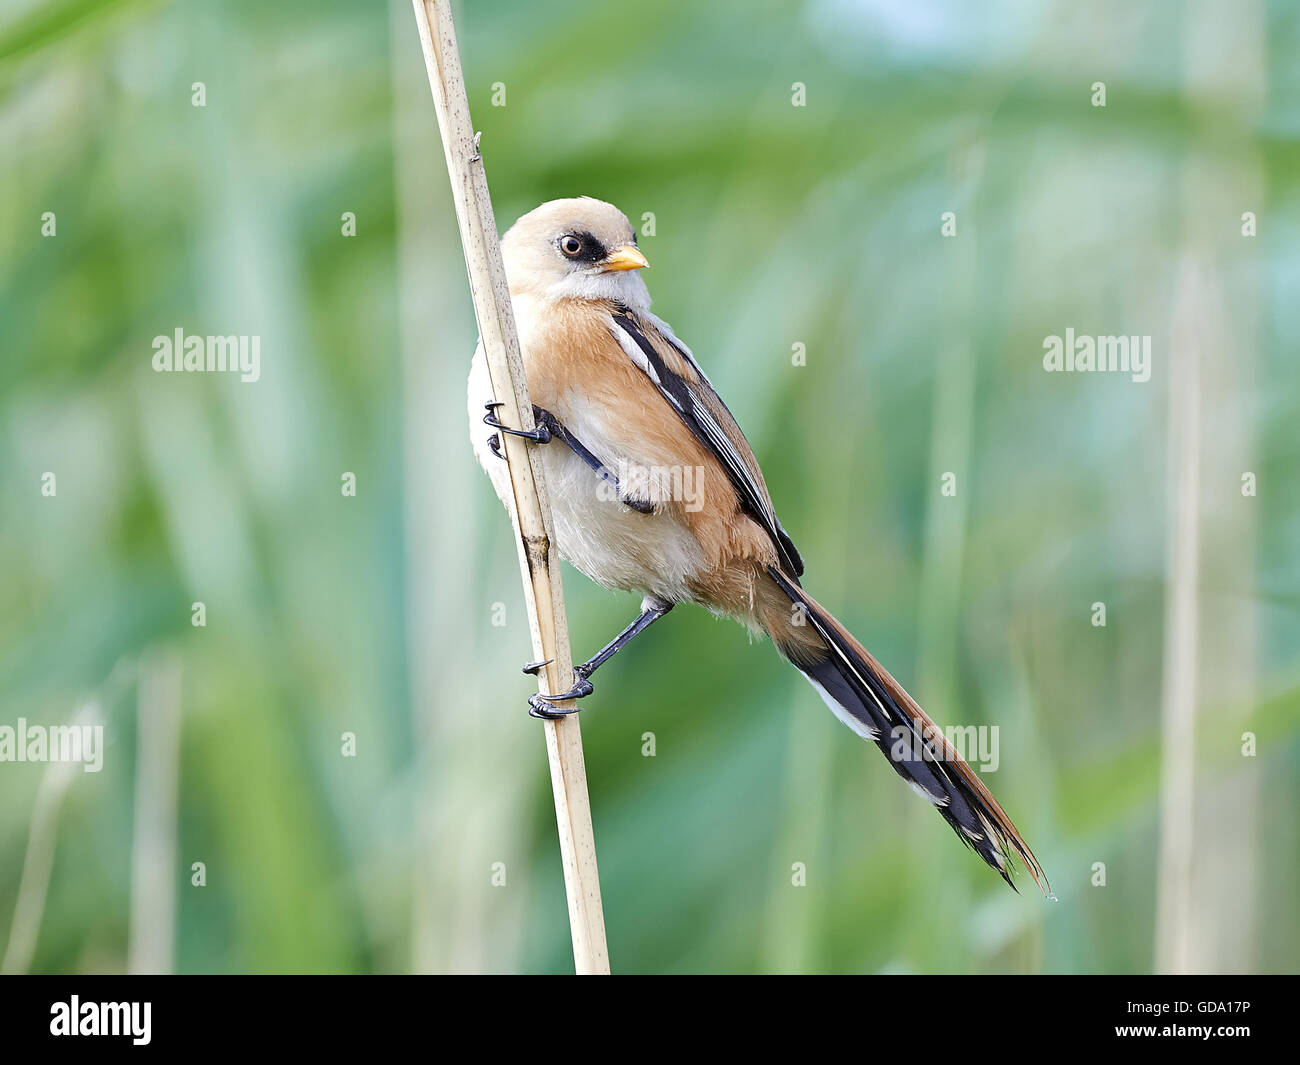 Juvenile bearded reedling resting on a branch in its habitat Stock Photo